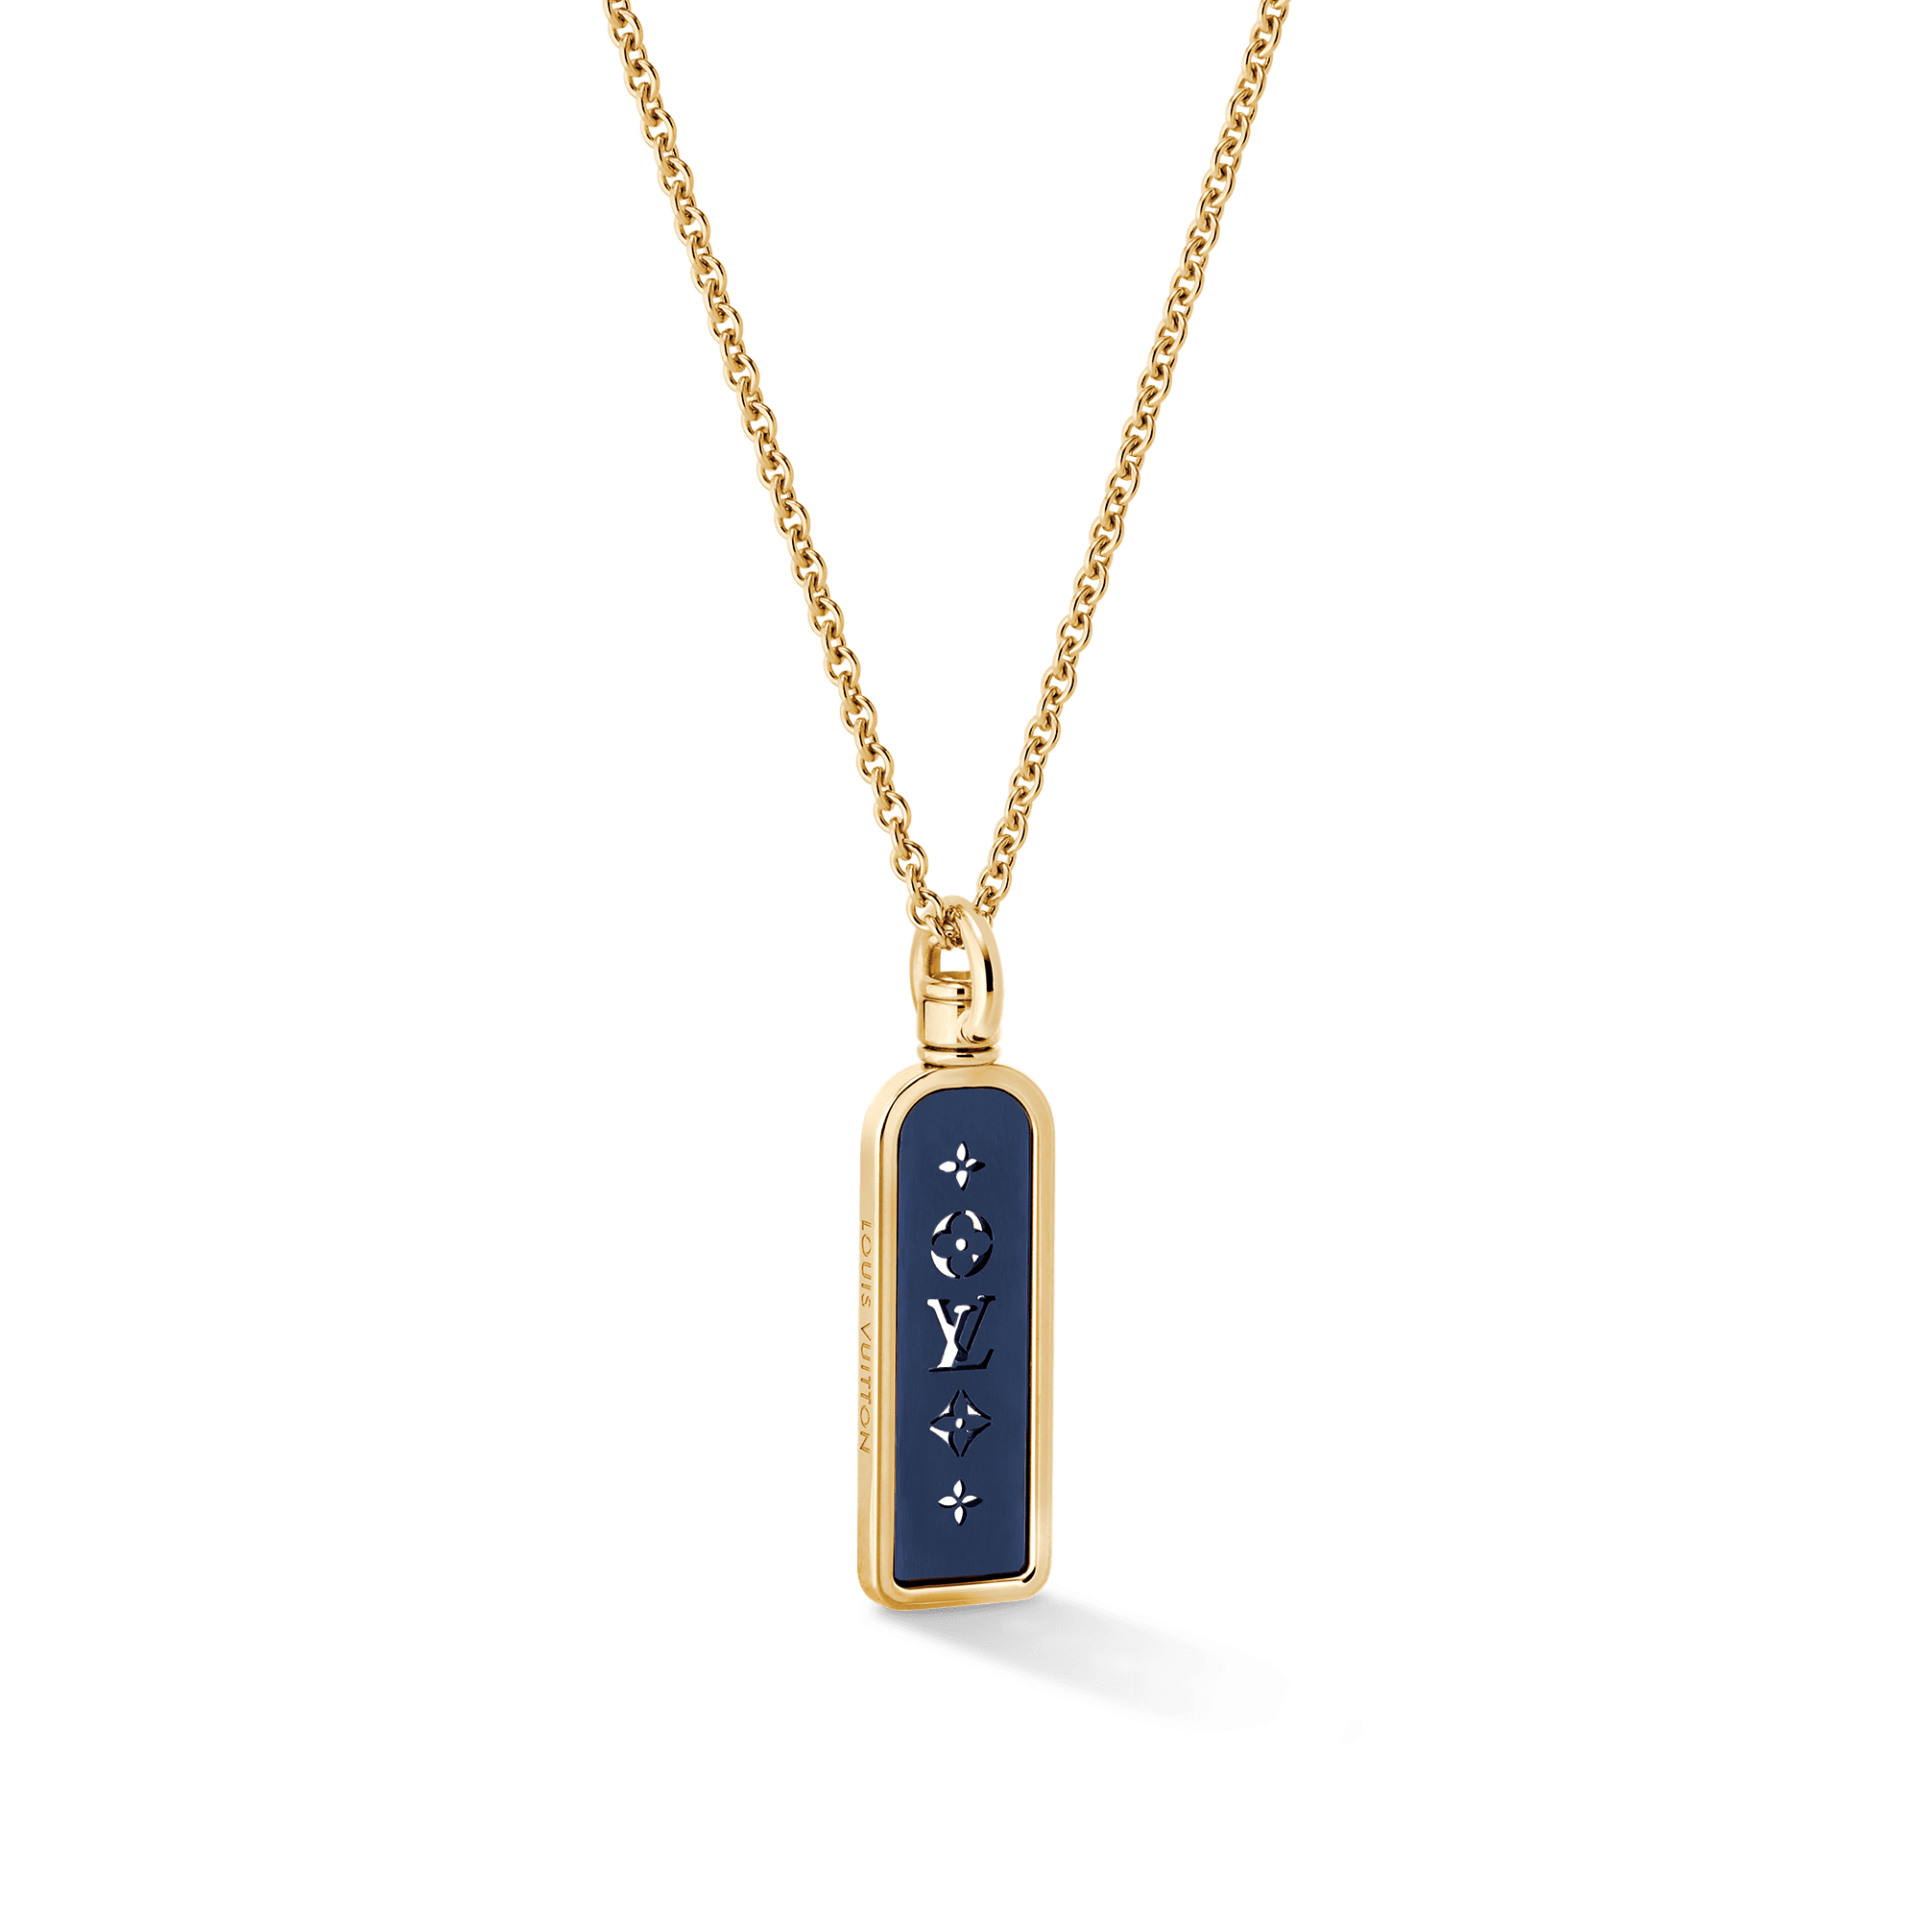 Les Gastons Tag Pendant In Titanium And 18 Carats Yellow Gold Nt$115,000